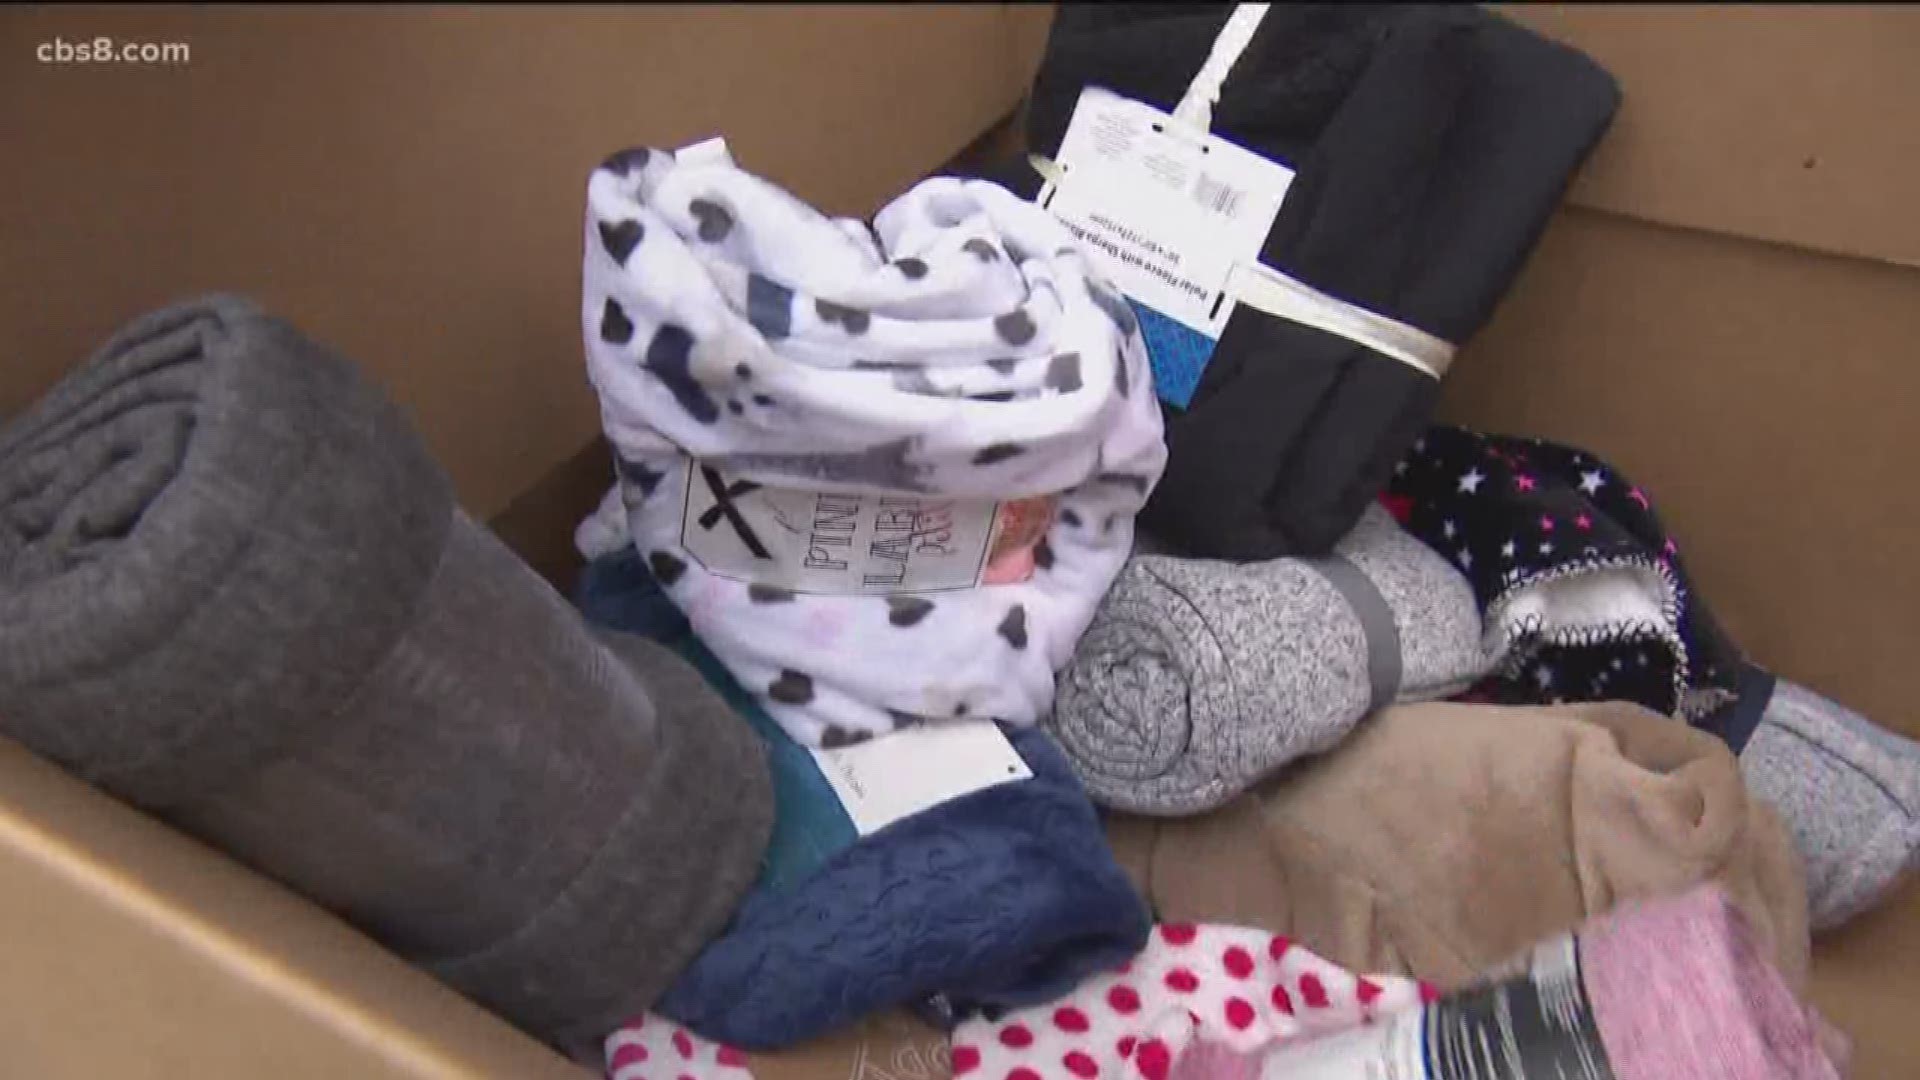 New Socks And Blankets Donated To Homeless In San Diego Cbs8com